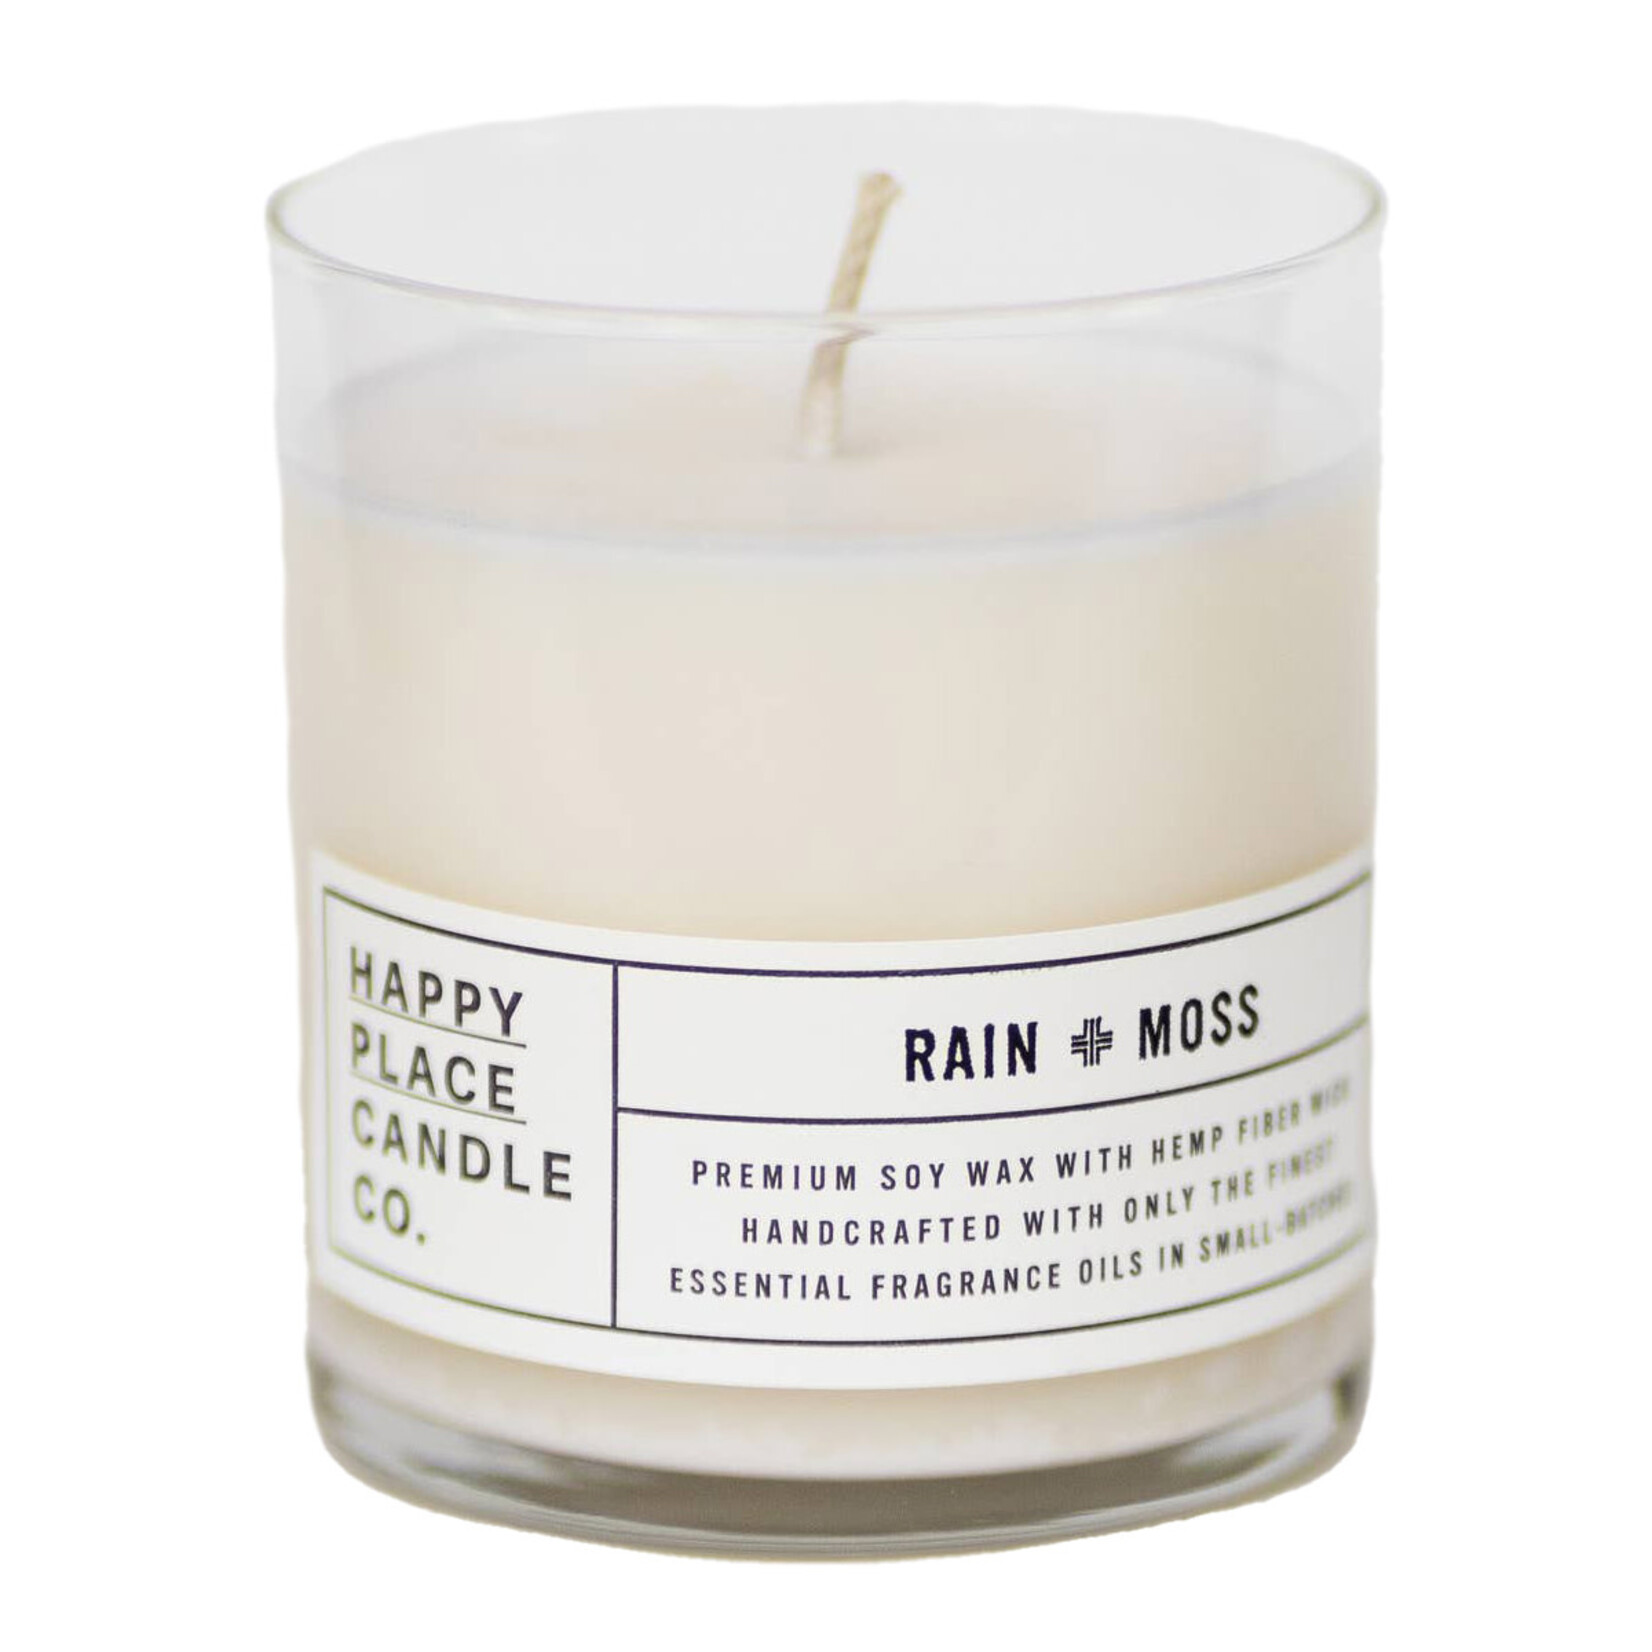 happy place candle co. rain + moss candle